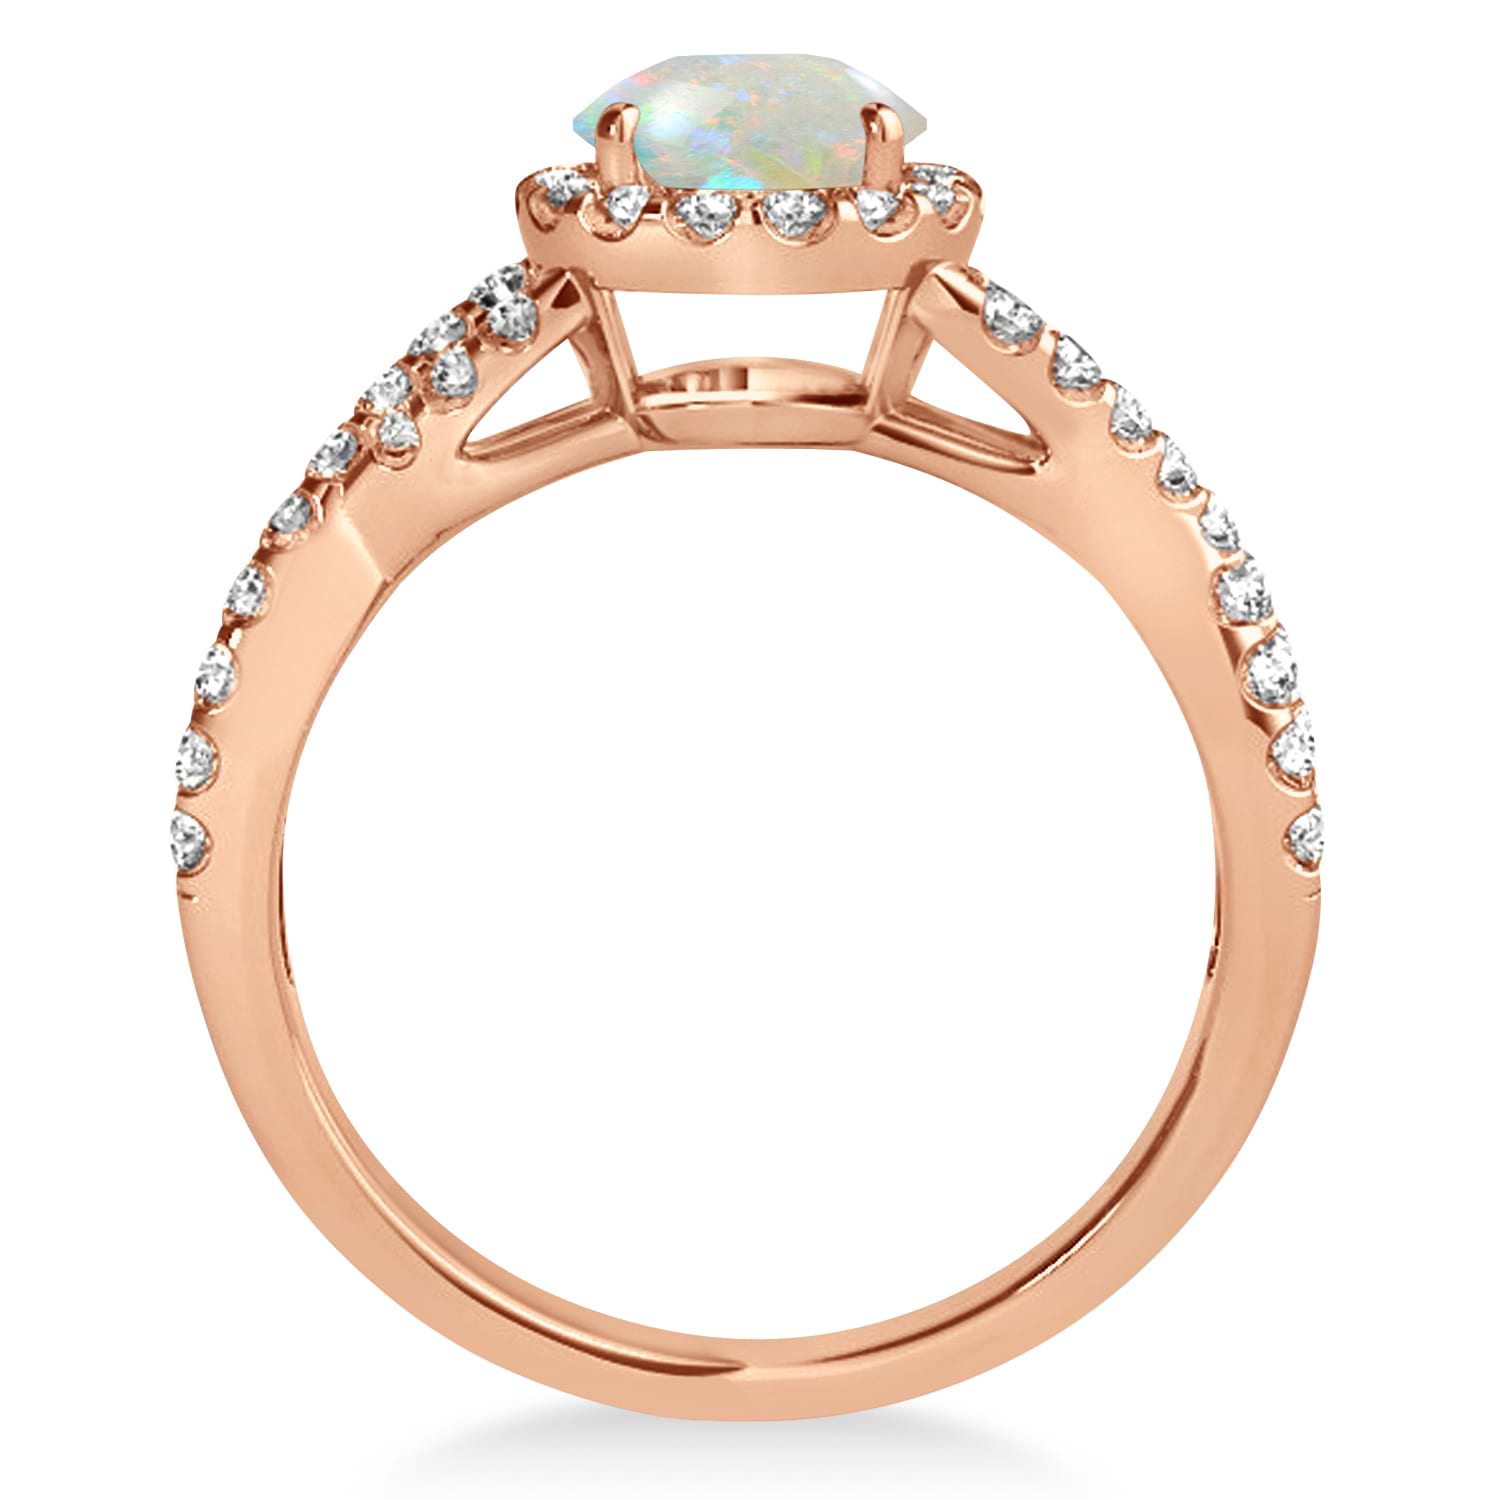 Opal & Diamond Twisted Engagement Ring 14k Rose Gold 1.07ct